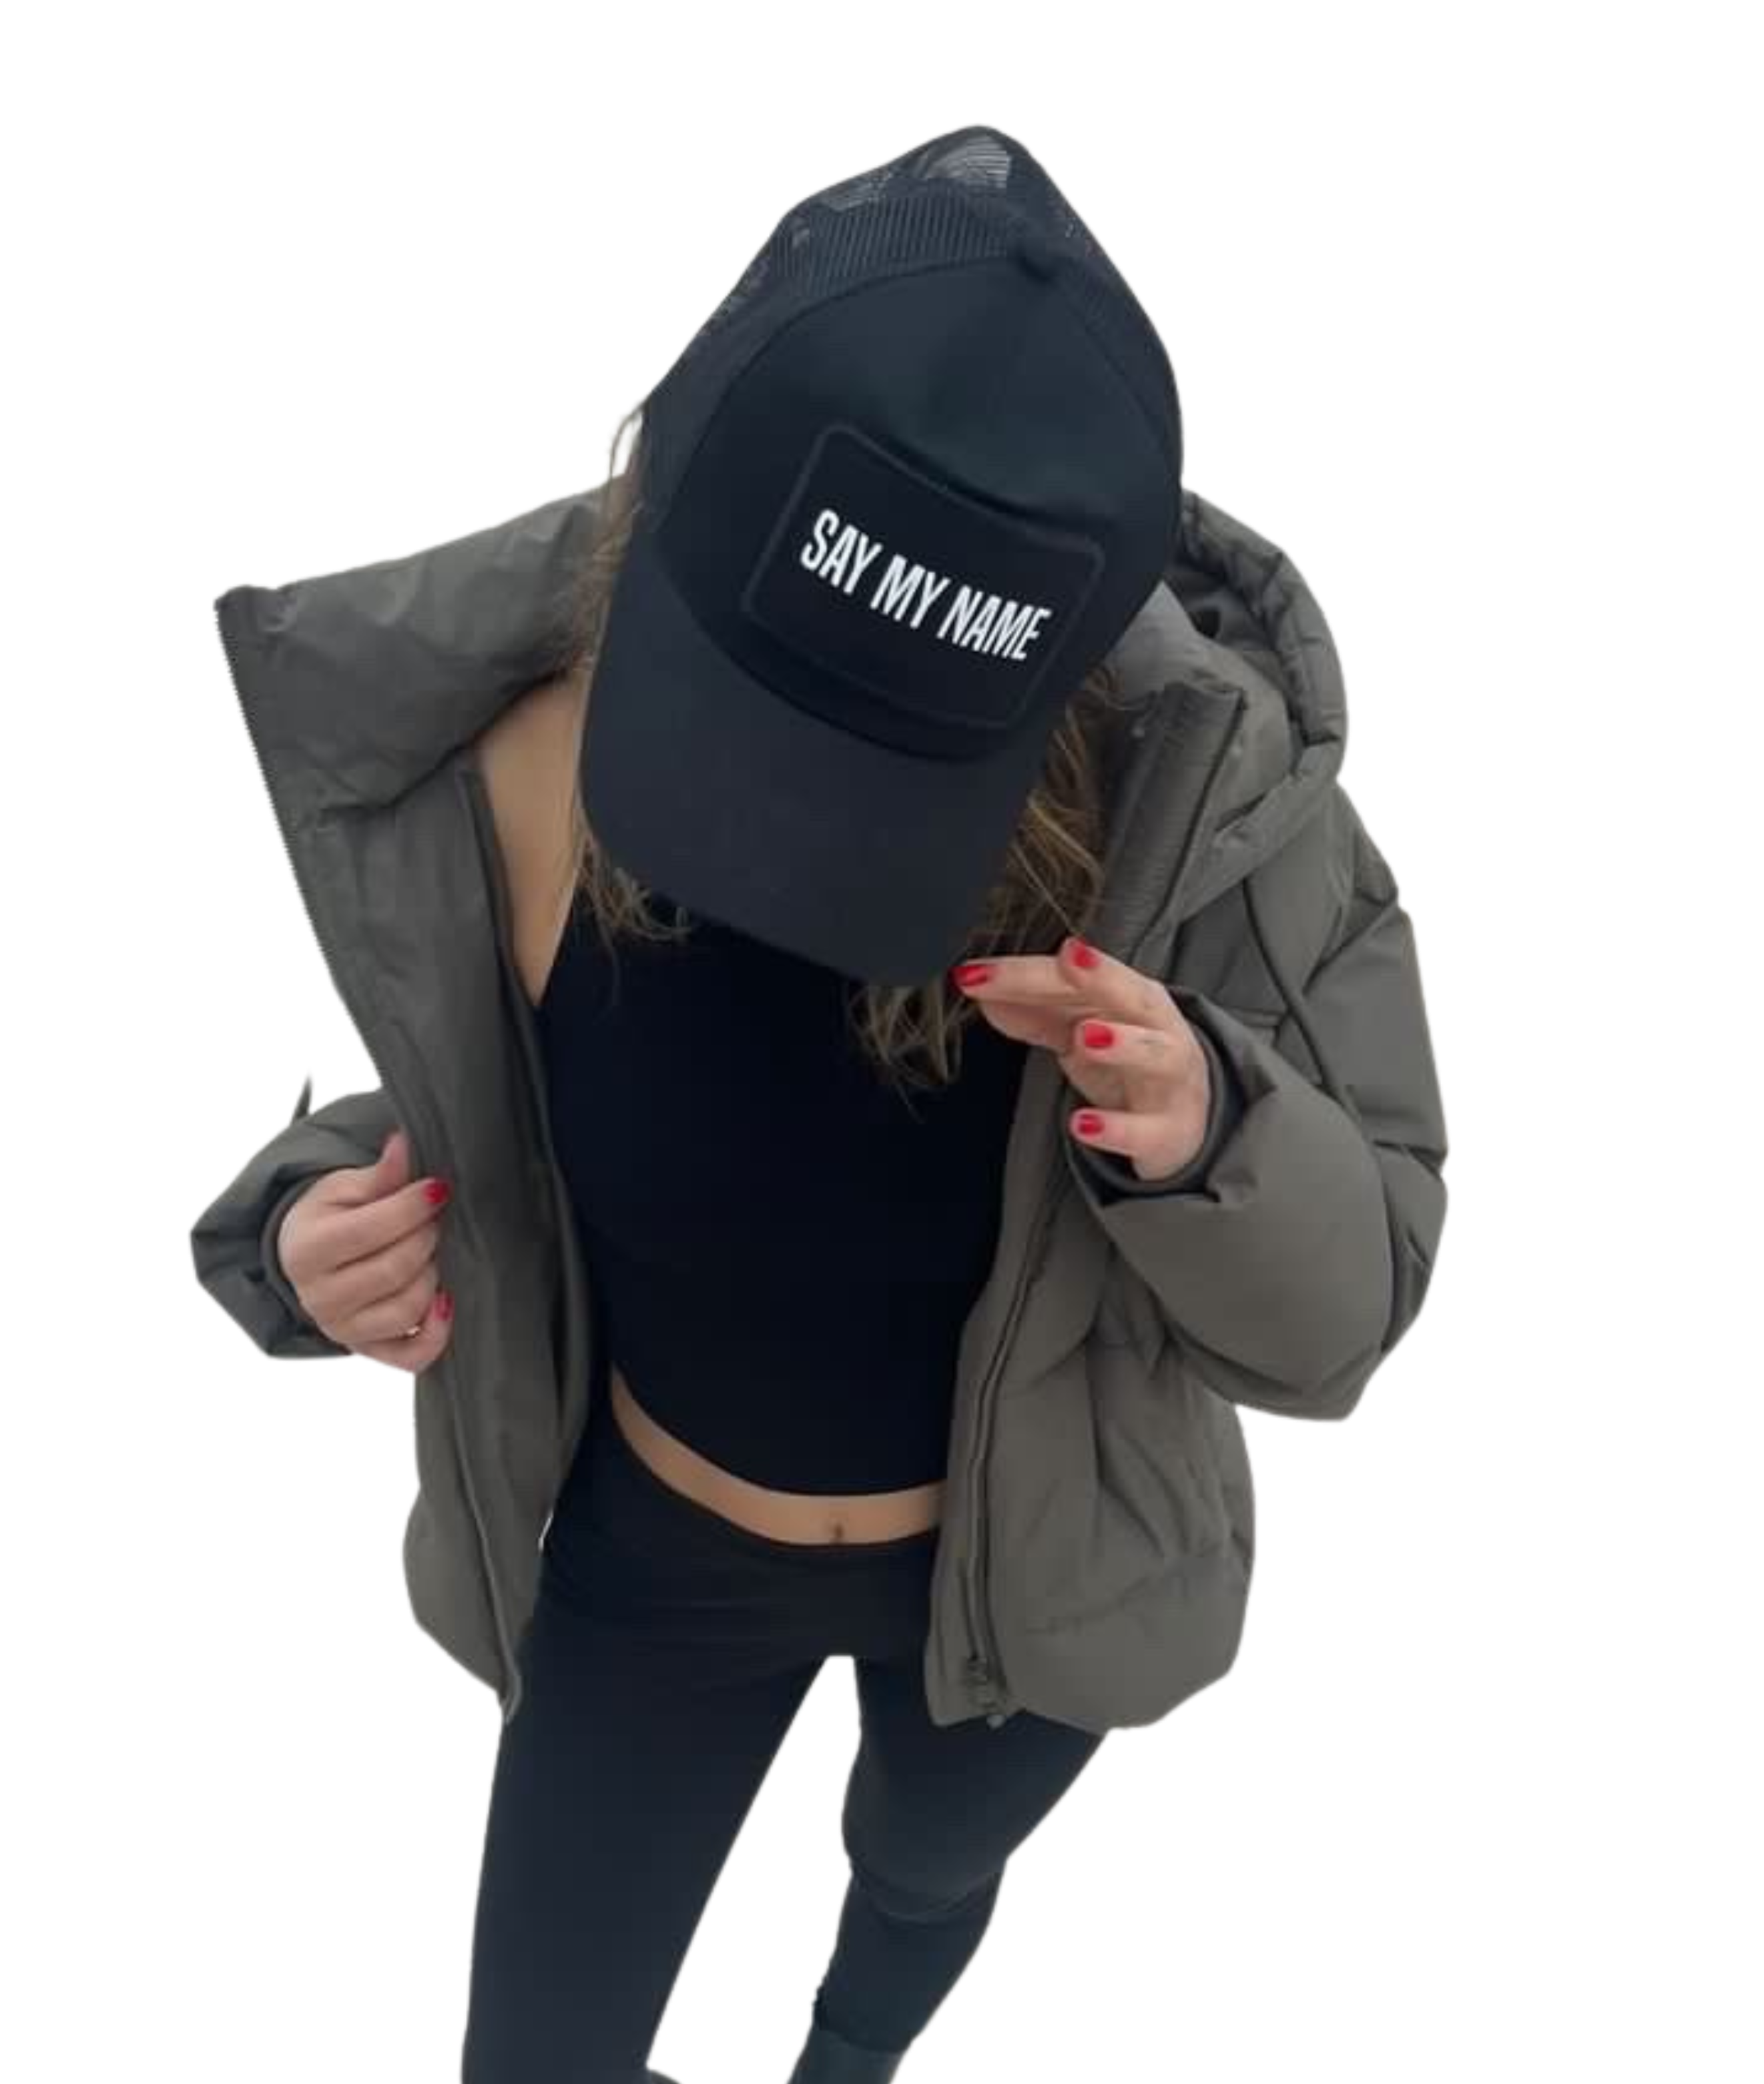 Unisex cap with removable CSG "SAY MY NAME" patch